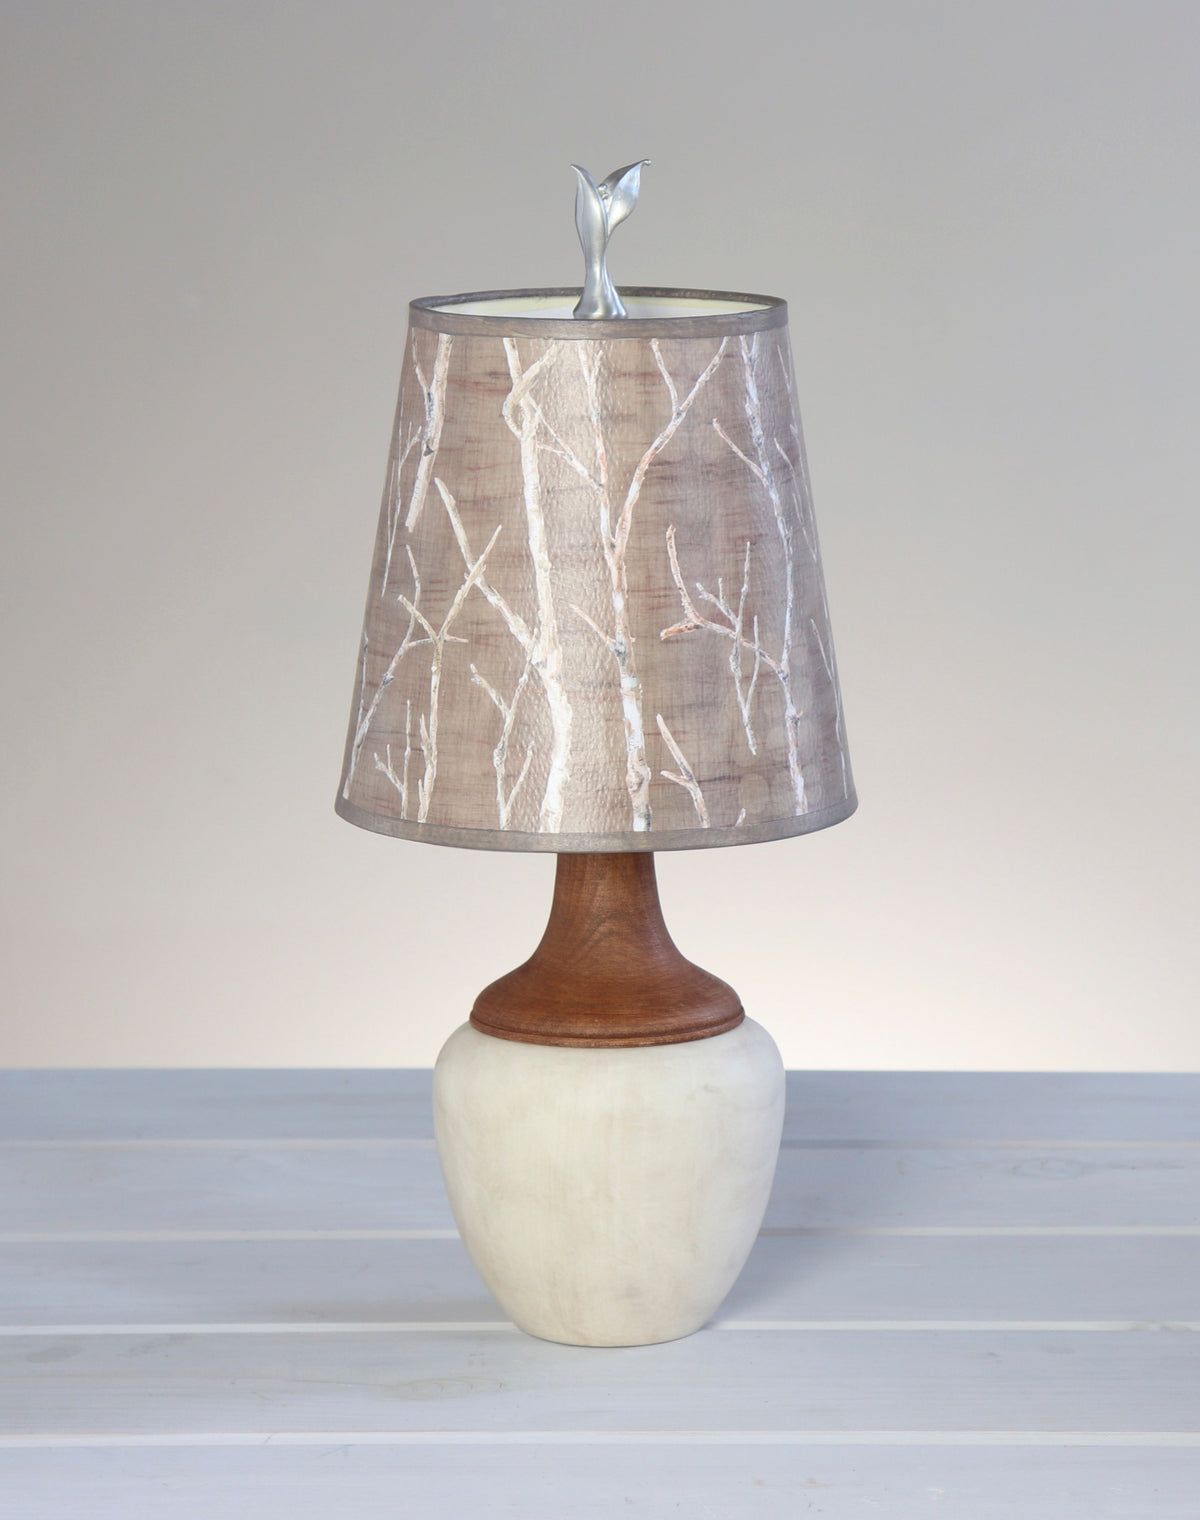 Ceramic and Maple Table Lamp with Small Drum Shade in Twigs